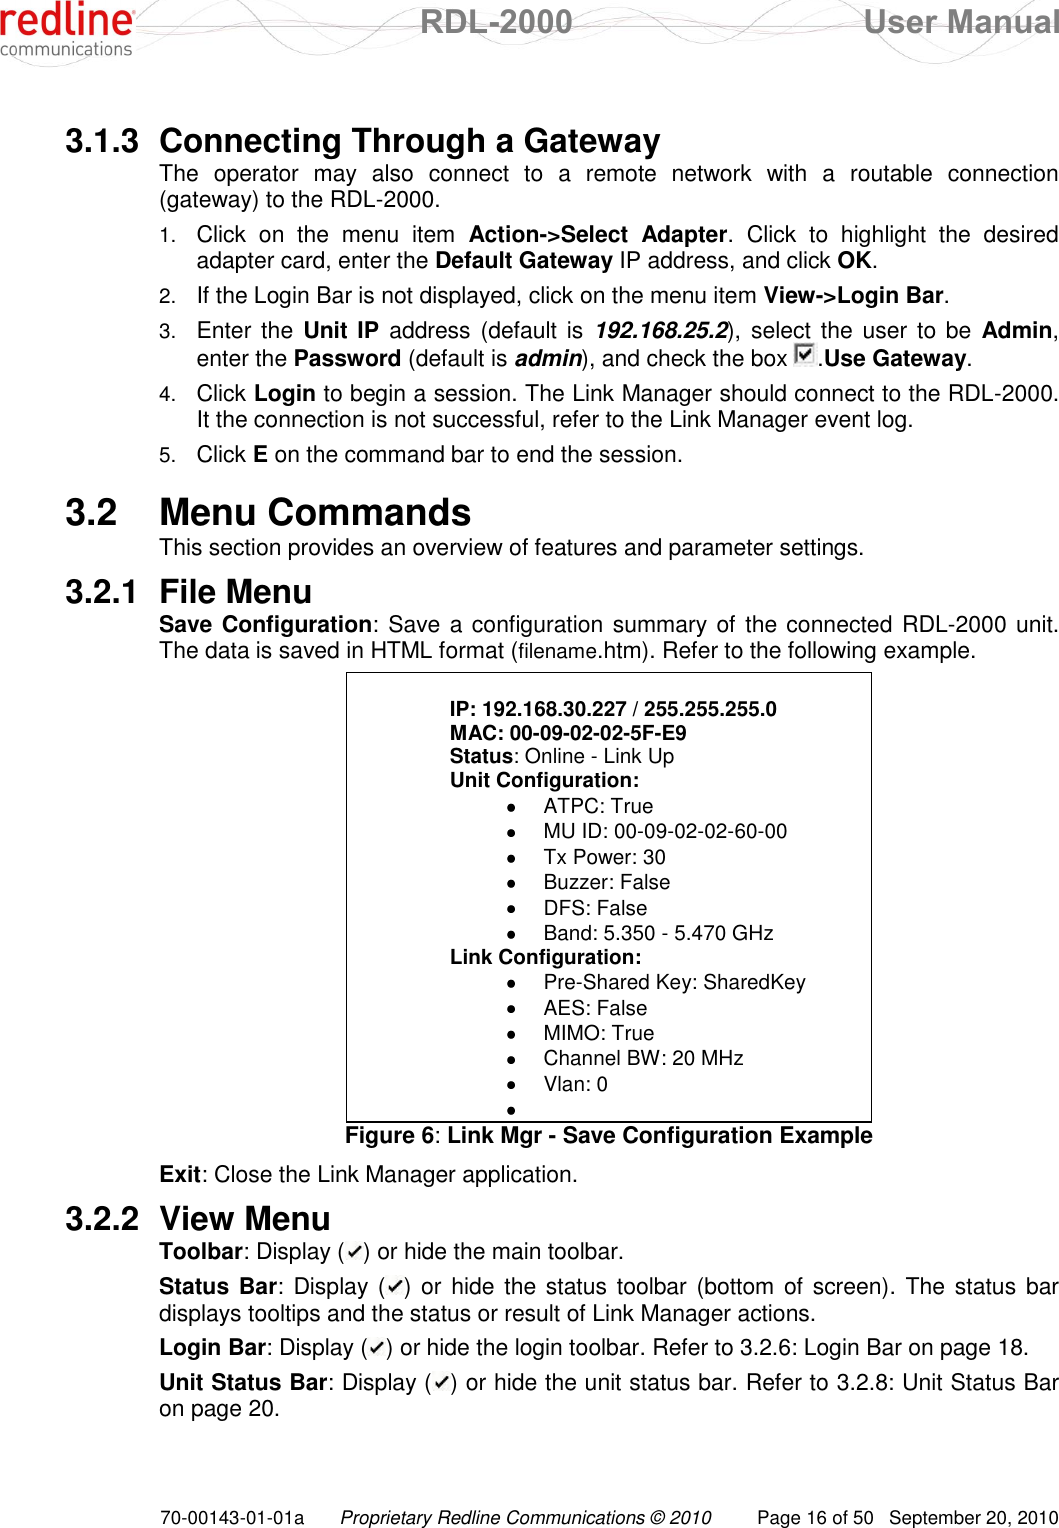  RDL-2000  User Manual 70-00143-01-01a Proprietary Redline Communications © 2010  Page 16 of 50  September 20, 2010  3.1.3  Connecting Through a Gateway The  operator  may  also  connect  to  a  remote  network  with  a  routable  connection (gateway) to the RDL-2000. 1. Click  on  the  menu  item  Action-&gt;Select  Adapter.  Click  to  highlight  the  desired adapter card, enter the Default Gateway IP address, and click OK. 2. If the Login Bar is not displayed, click on the menu item View-&gt;Login Bar. 3. Enter the Unit IP address  (default is 192.168.25.2), select the  user to be  Admin, enter the Password (default is admin), and check the box  .Use Gateway. 4. Click Login to begin a session. The Link Manager should connect to the RDL-2000. It the connection is not successful, refer to the Link Manager event log. 5. Click E on the command bar to end the session.  3.2  Menu Commands This section provides an overview of features and parameter settings. 3.2.1  File Menu Save Configuration: Save a configuration summary of the connected RDL-2000 unit. The data is saved in HTML format (filename.htm). Refer to the following example.  IP: 192.168.30.227 / 255.255.255.0 MAC: 00-09-02-02-5F-E9 Status: Online - Link Up Unit Configuration:    ATPC: True    MU ID: 00-09-02-02-60-00    Tx Power: 30    Buzzer: False    DFS: False    Band: 5.350 - 5.470 GHz  Link Configuration:    Pre-Shared Key: SharedKey    AES: False    MIMO: True    Channel BW: 20 MHz    Vlan: 0     Figure 6: Link Mgr - Save Configuration Example Exit: Close the Link Manager application. 3.2.2  View Menu Toolbar: Display ( ) or hide the main toolbar. Status Bar: Display ( ) or hide the status toolbar (bottom of  screen). The status bar displays tooltips and the status or result of Link Manager actions. Login Bar: Display ( ) or hide the login toolbar. Refer to 3.2.6: Login Bar on page 18. Unit Status Bar: Display ( ) or hide the unit status bar. Refer to 3.2.8: Unit Status Bar on page 20.  